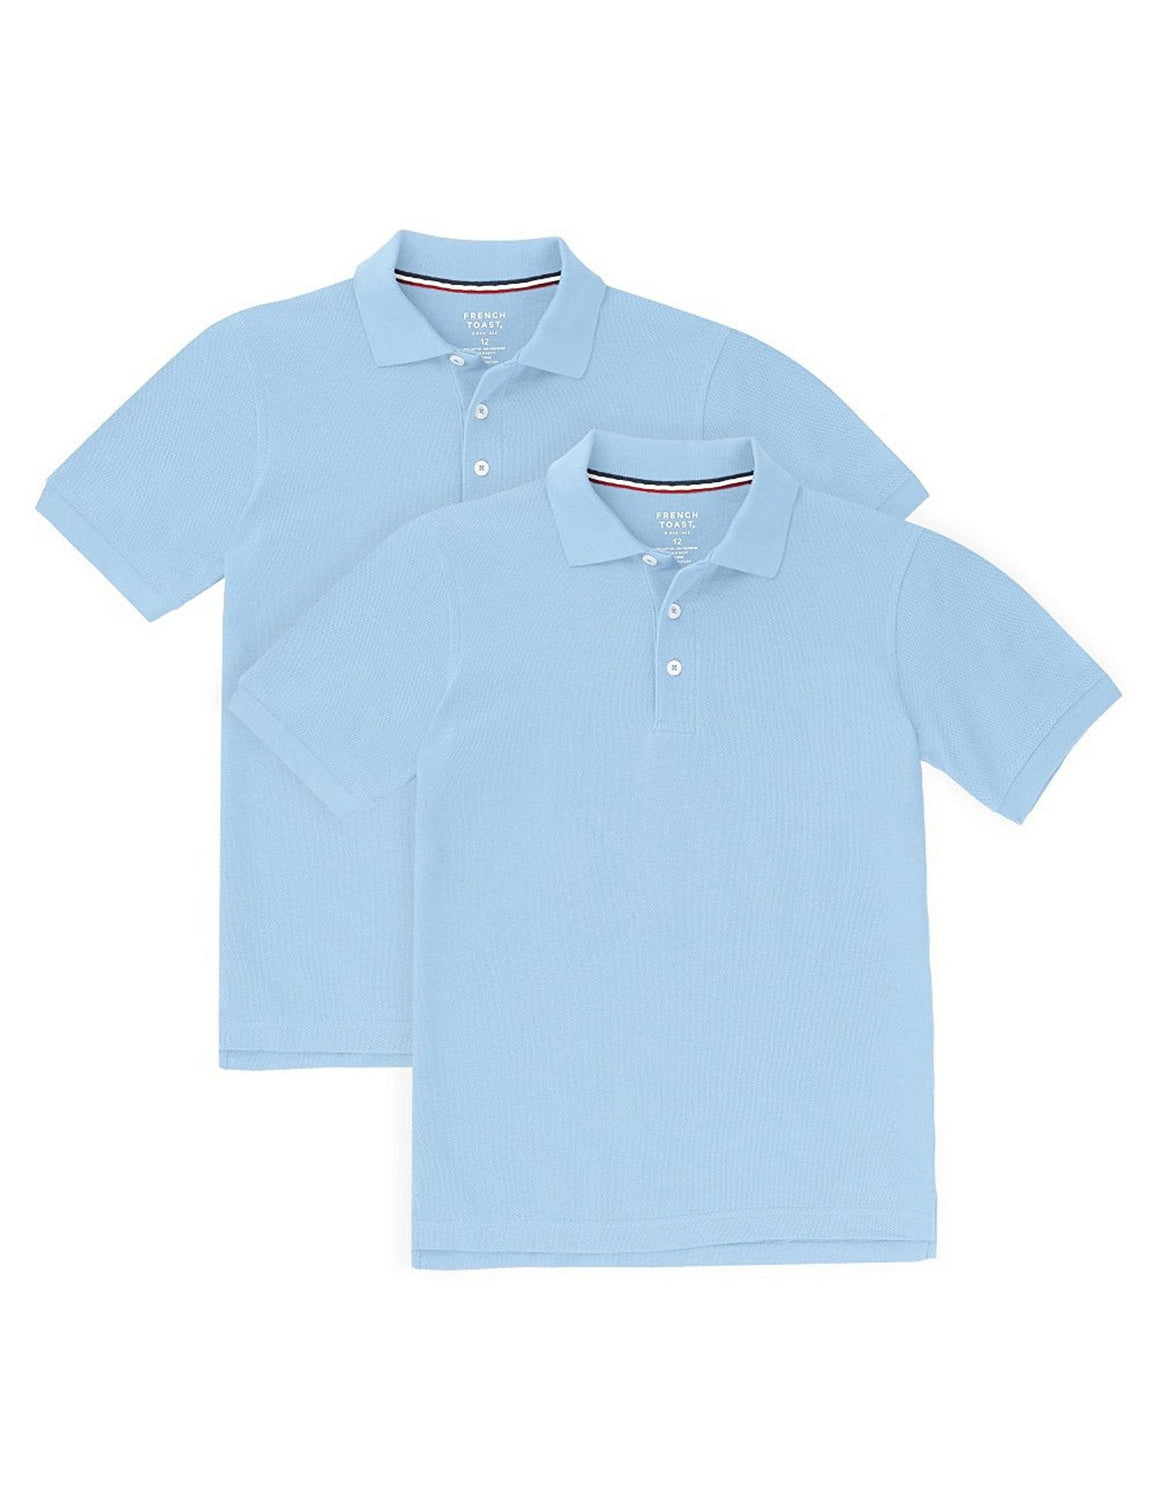 French Toast Boys' 2-Pack Short Sleeve Pique Polo